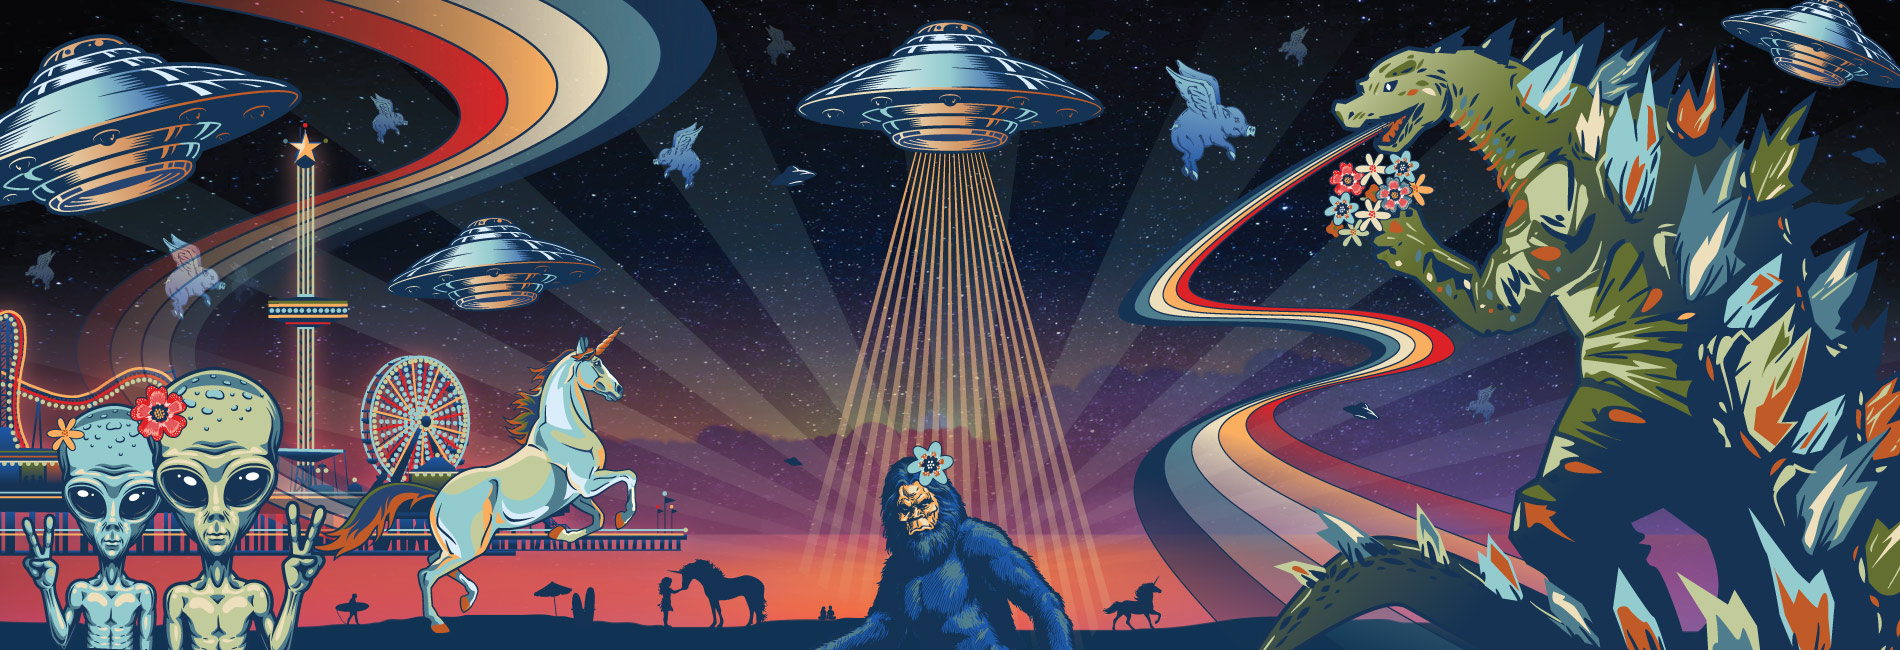 Web banner of Godzilla, ETs, Unicorns, Bigfoot, Flying Pigs, Pleasure Pier and more for SECC 2021: Anything Is Possible charitable campaign finale